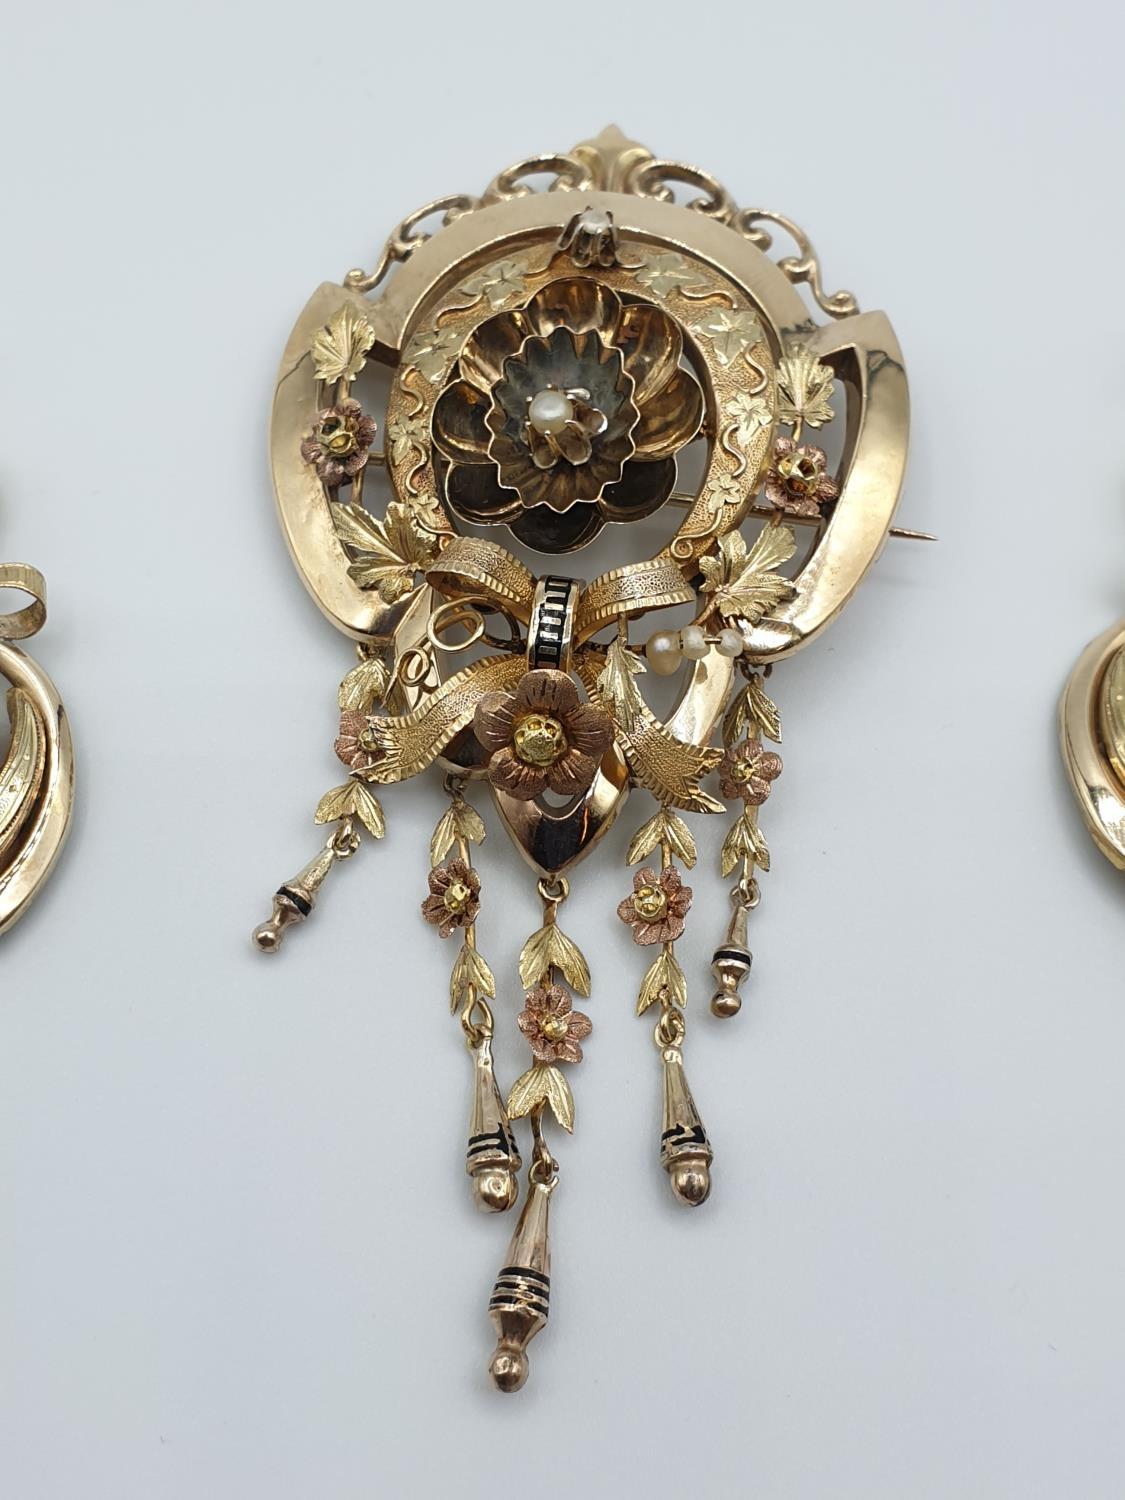 Early Victorian 15ct yellow gold brooch and earring set with seed pearls, weight 17g in total - Image 2 of 8